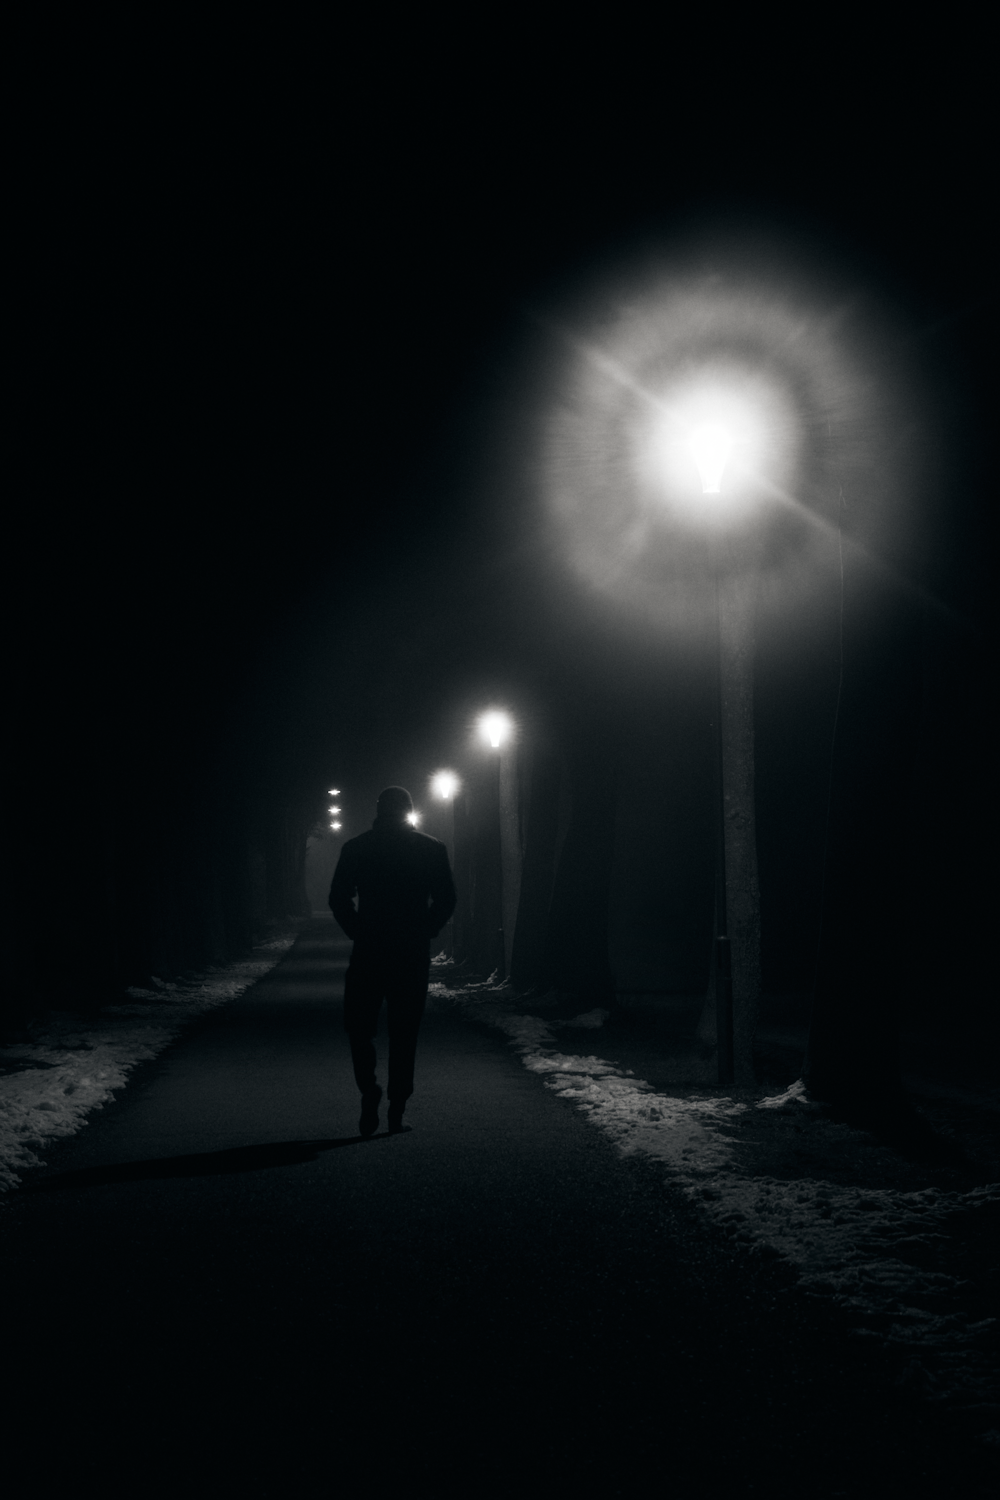 silhouette of man walking on road during night time